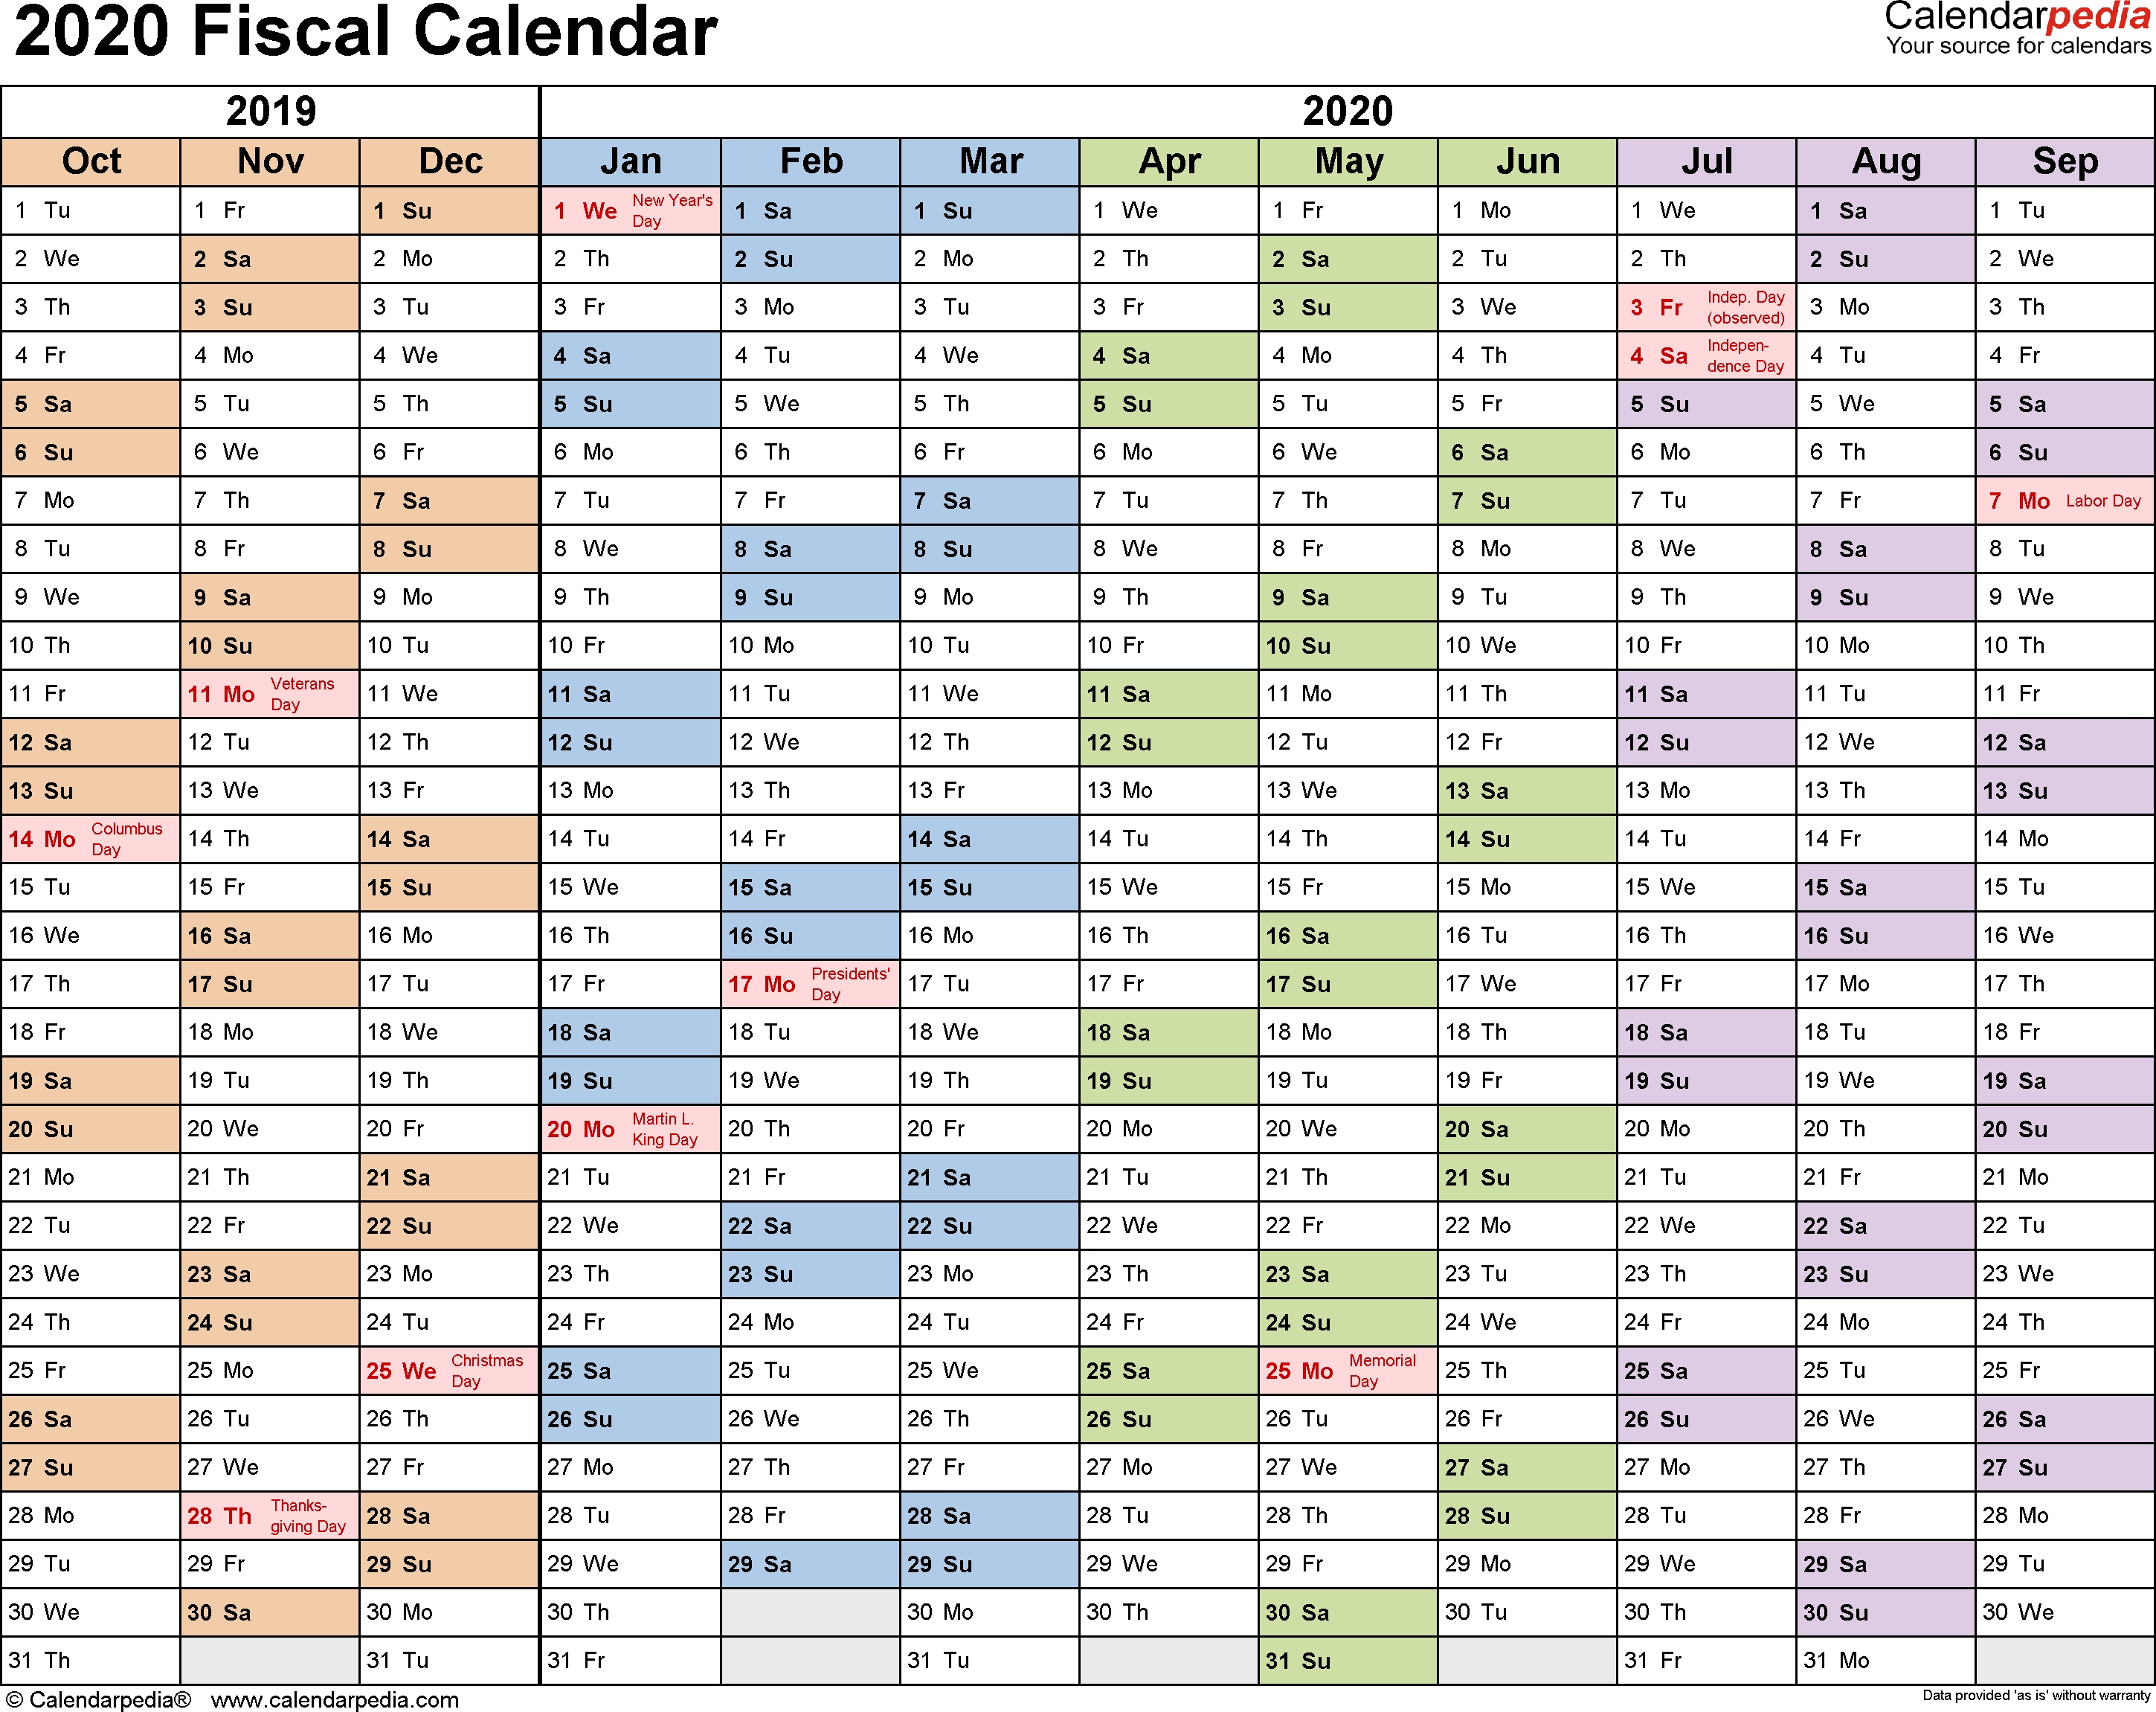 Fiscal Calendars 2020 - Free Printable Word Templates with 2020 4-4-5 Fiscal Accouting Calendar